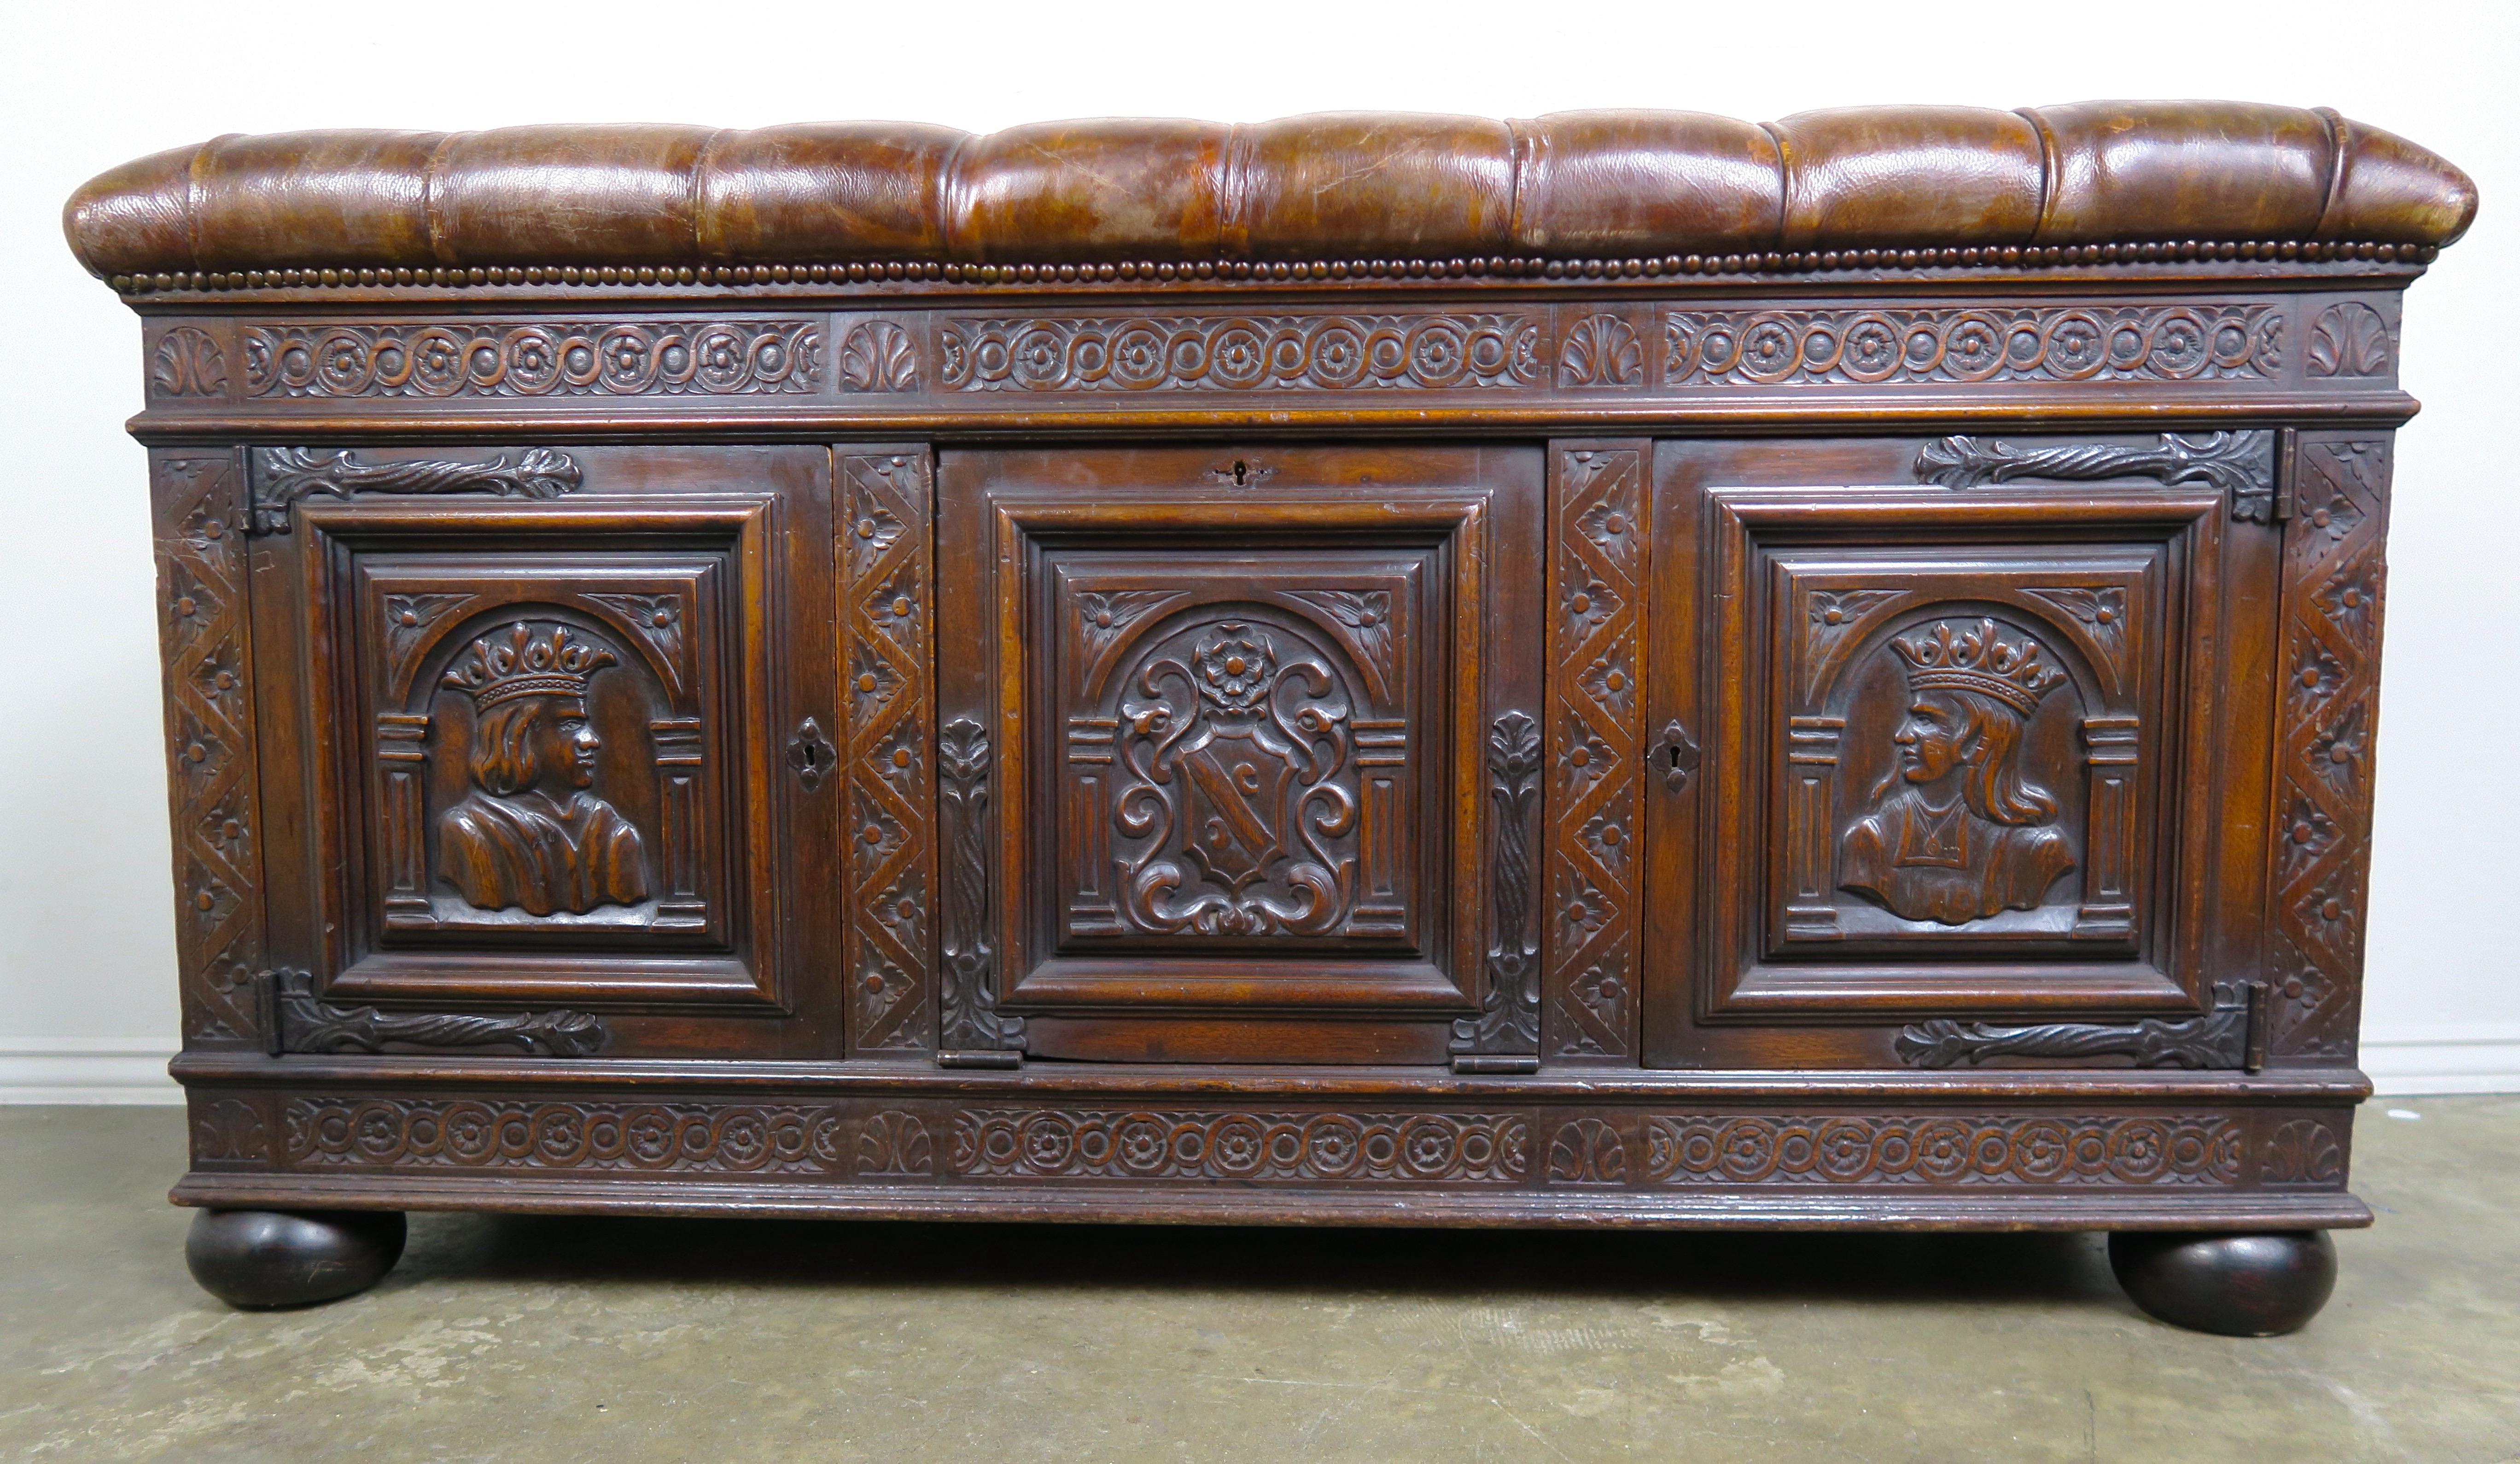 English oak carved bench/trunk that is detailed with a coat of arms flanked by the king & queen. The top is upholstered in tufted leather and detailed with antique brass nail heads. The piece stands on four bun feet and has three doors that open to